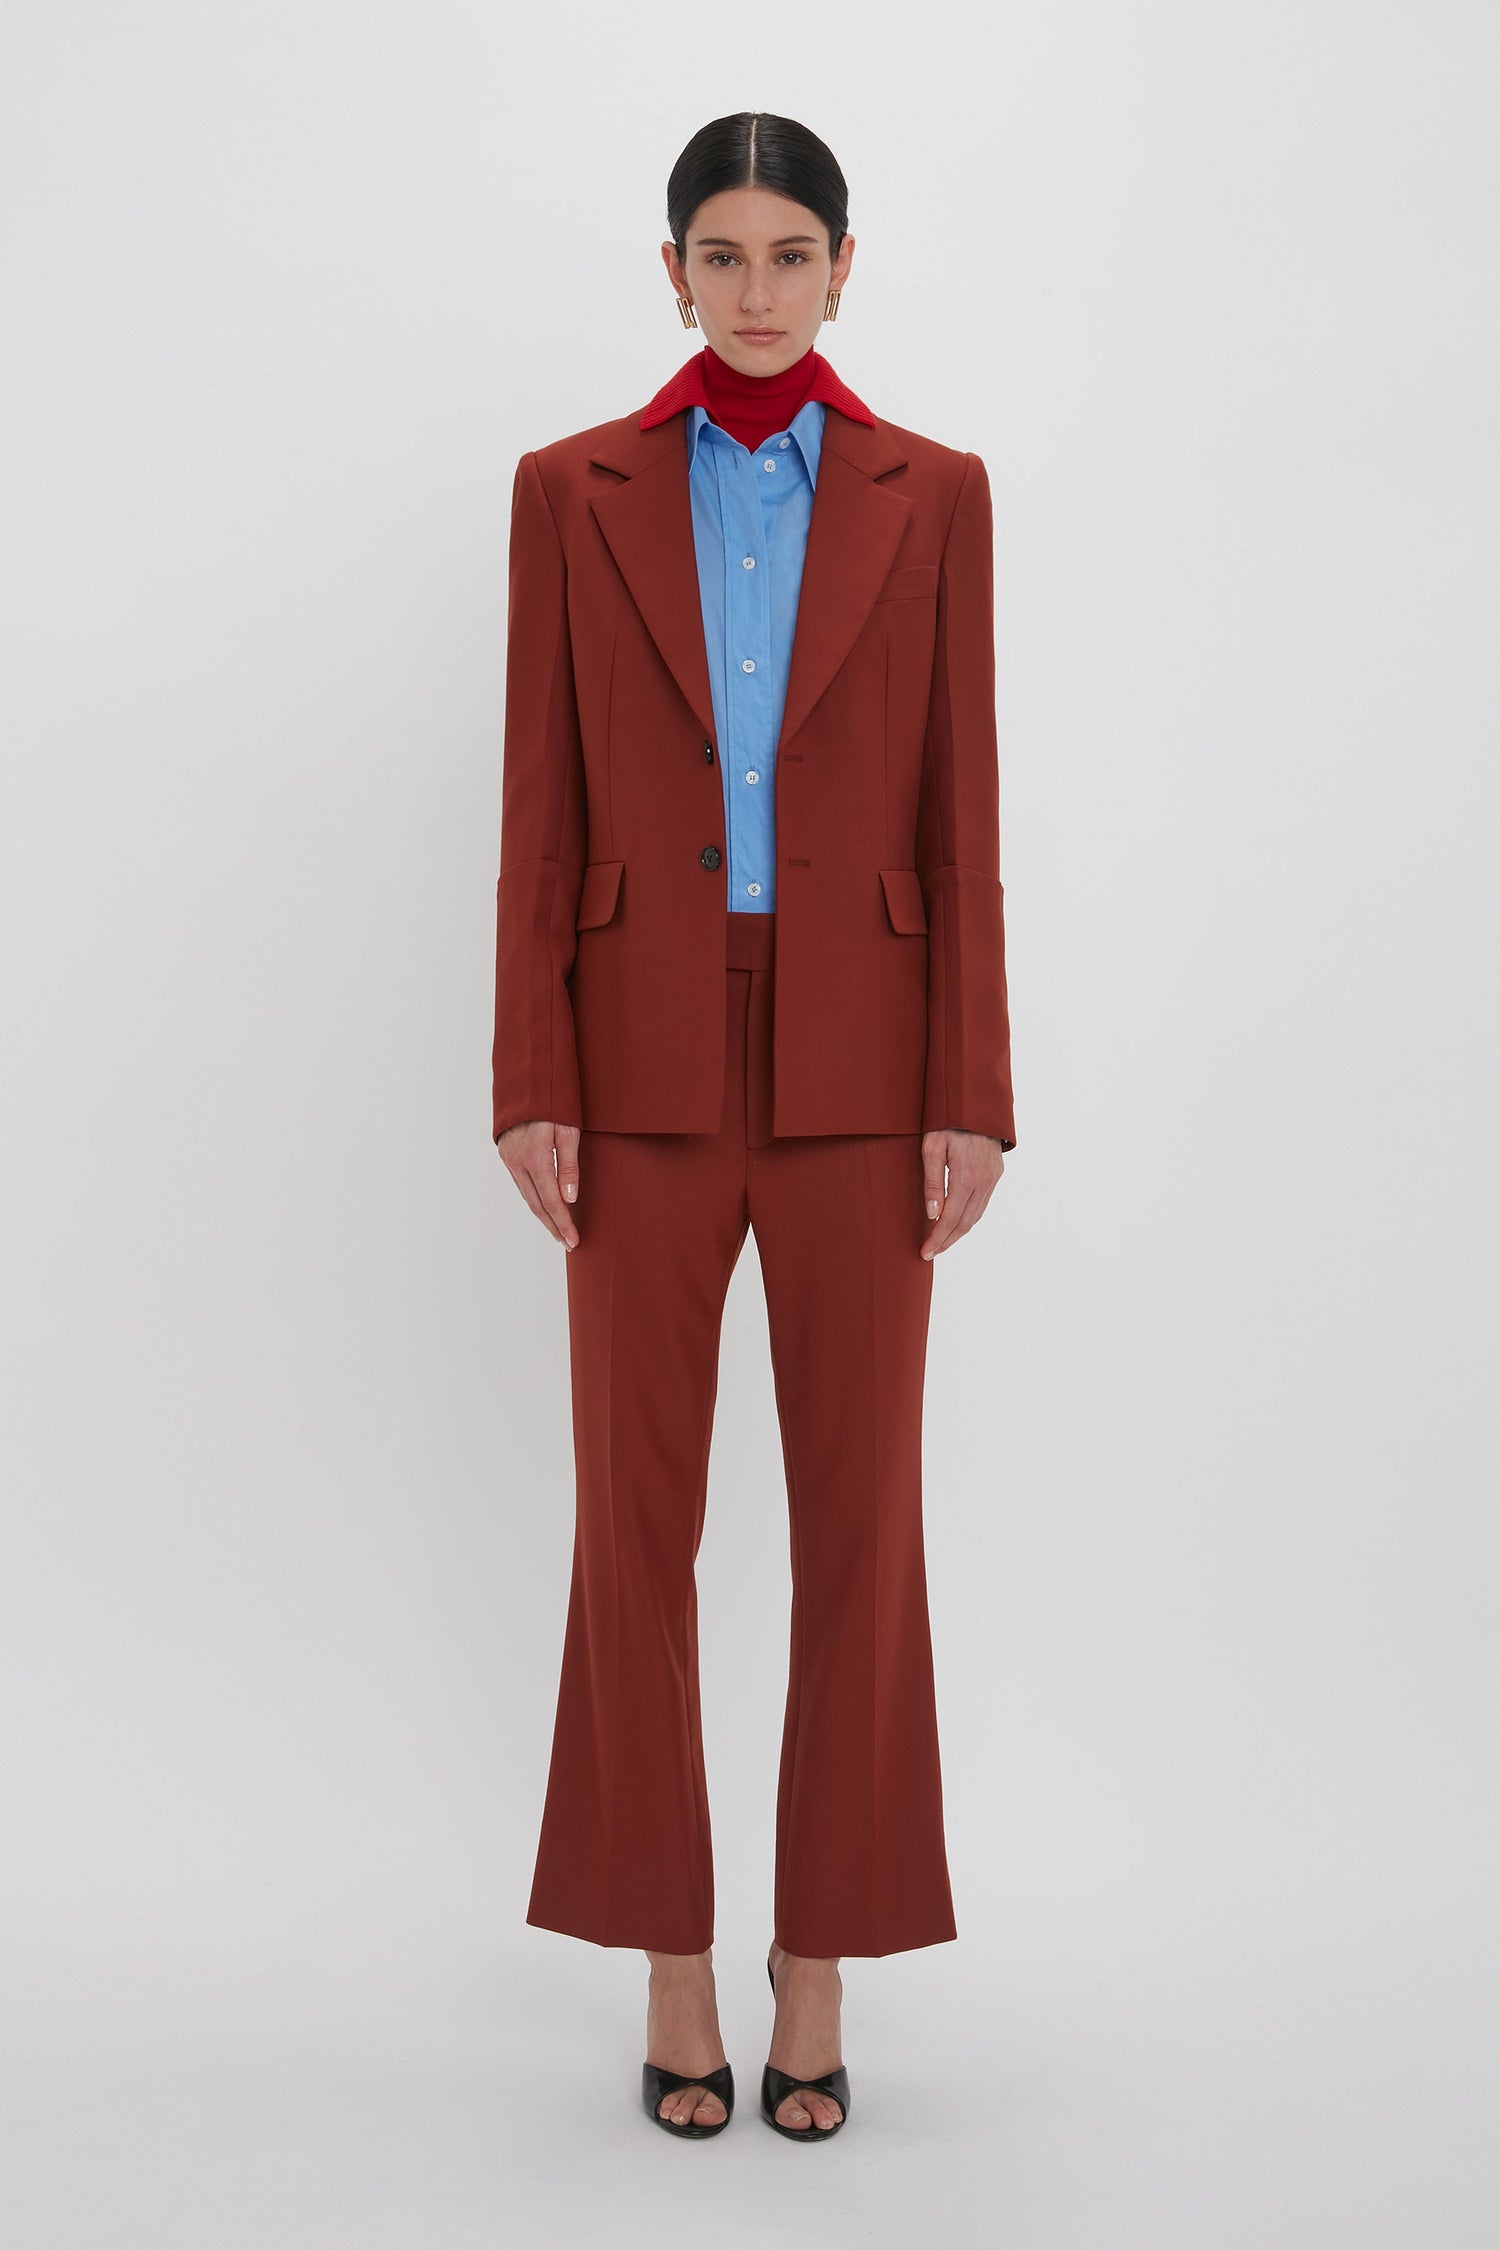 A person stands against a plain white background wearing a rust-colored suit with Wide Cropped Flare Trouser In Russet over a blue shirt, complemented by a red scarf around the neck and black heeled shoes, exuding the timeless elegance of Victoria Beckham AW24.